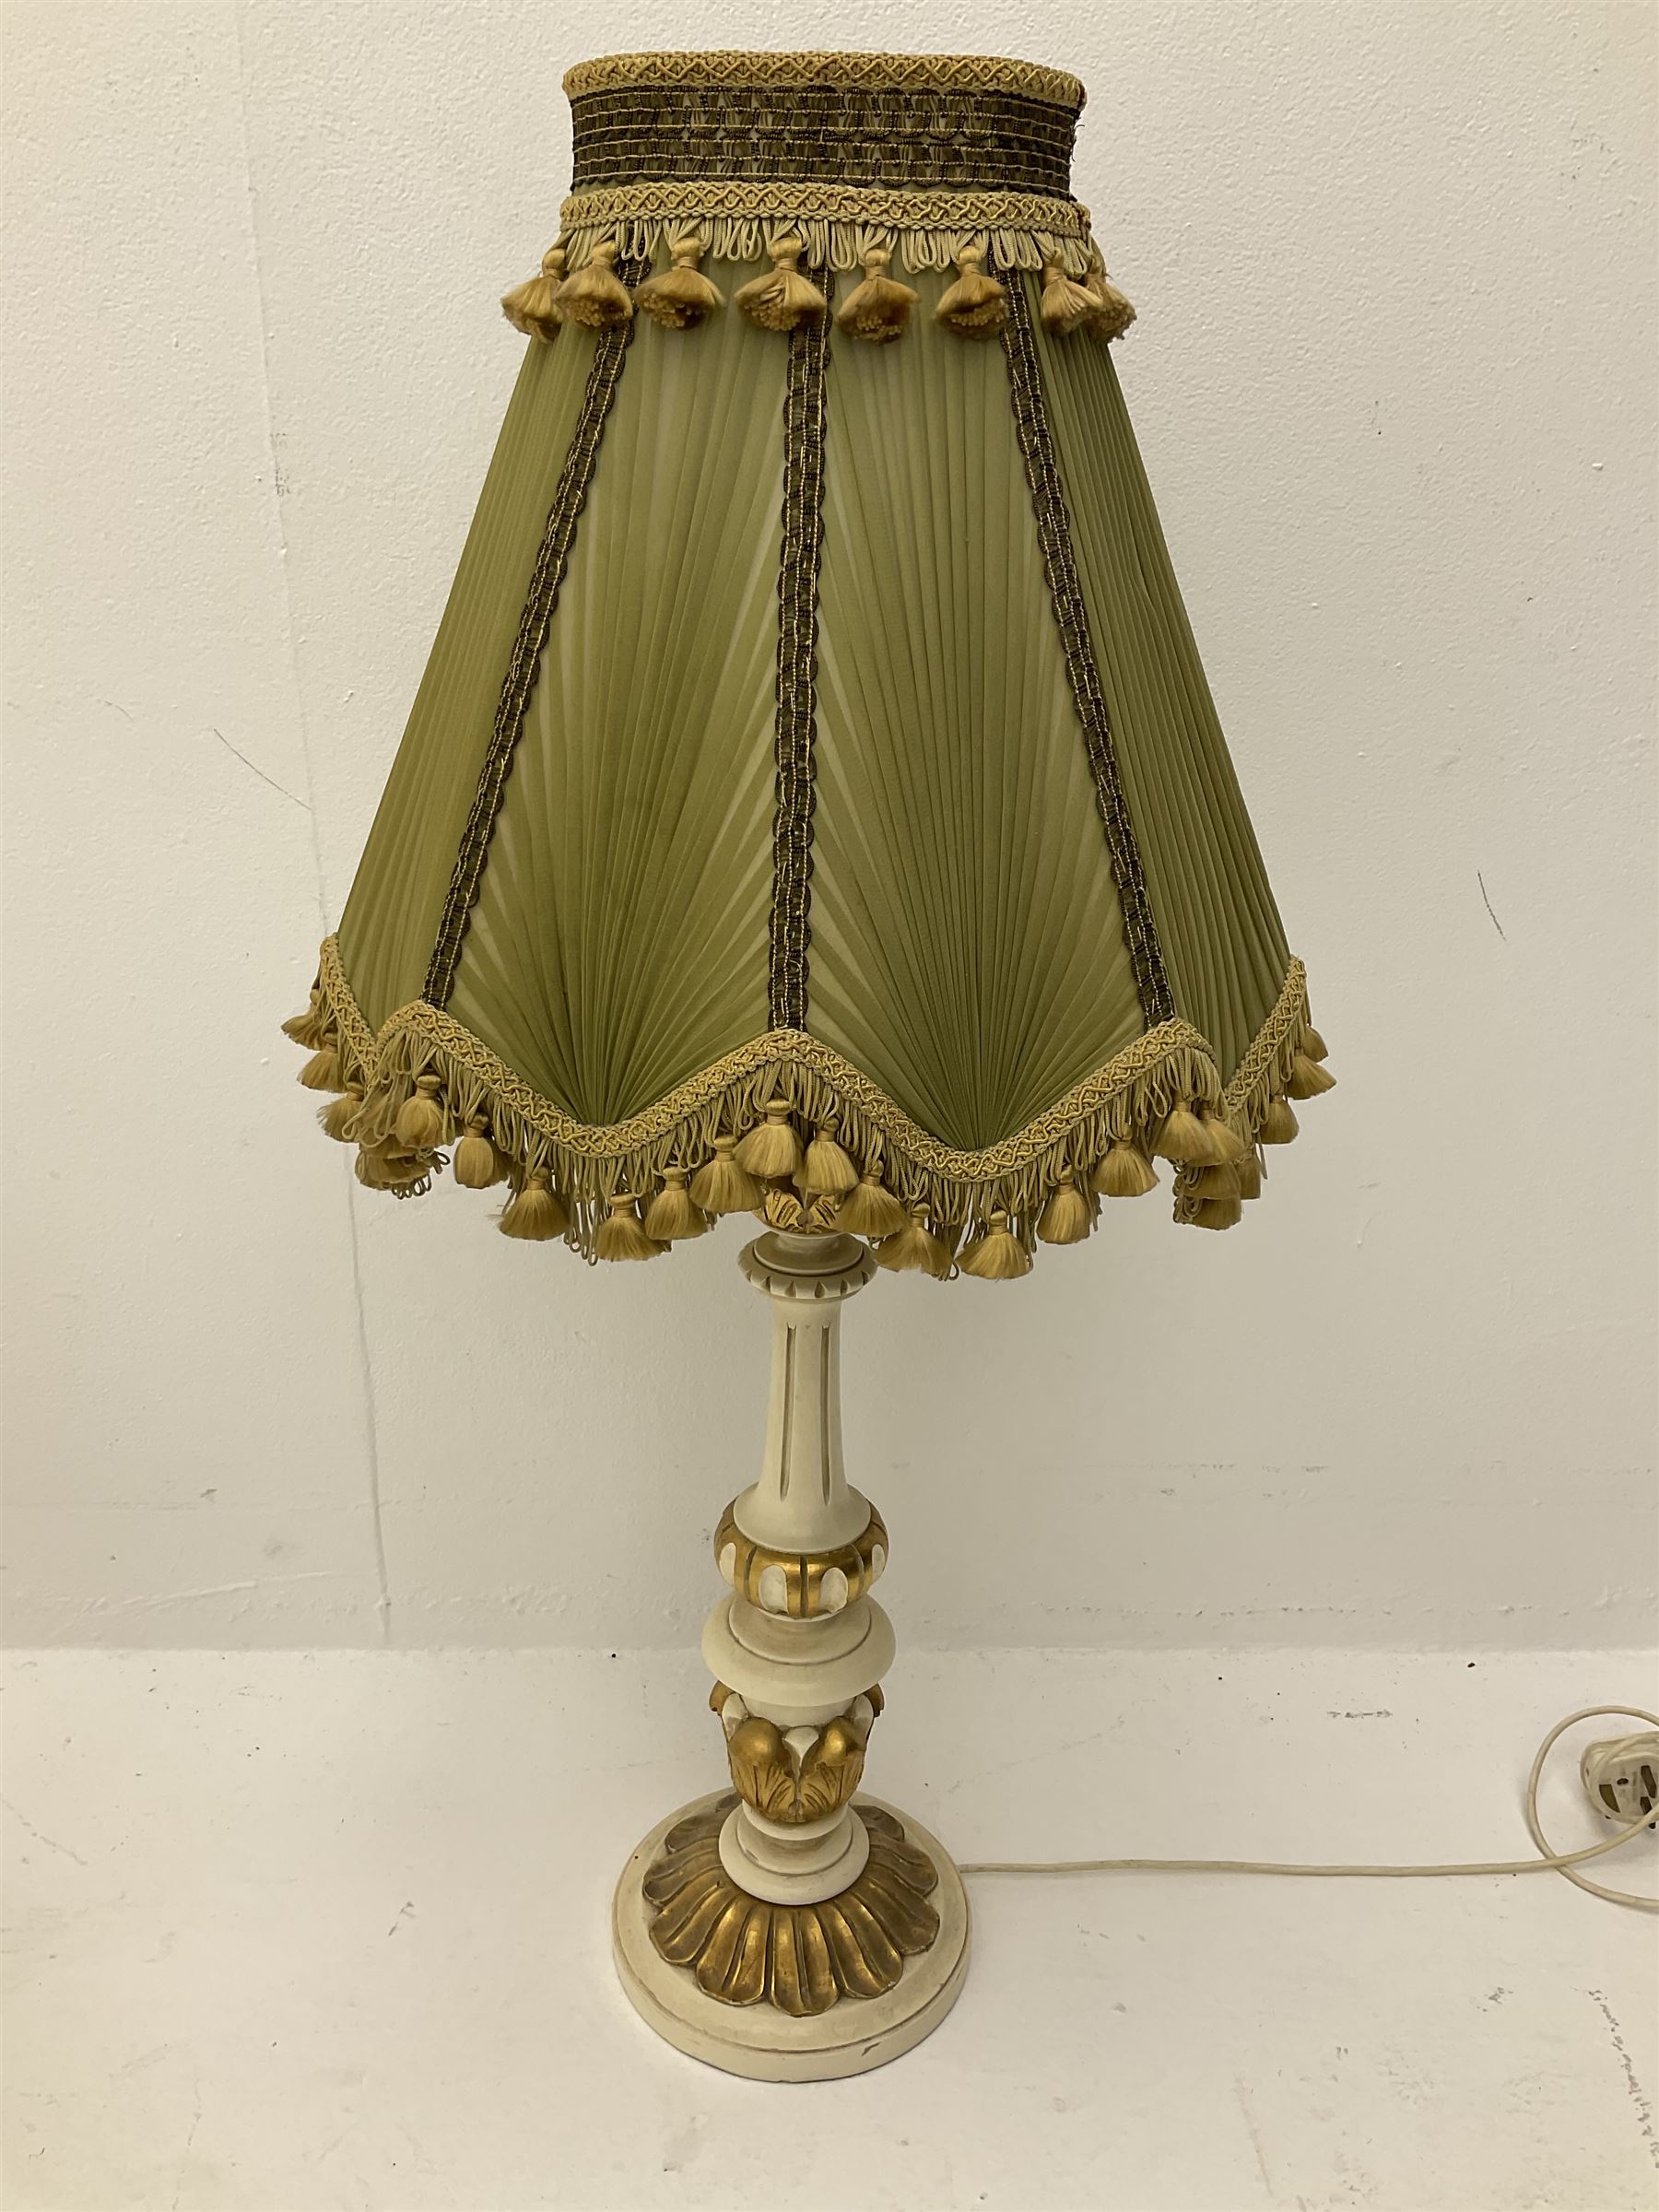 A cream and gilt finished table lamp - Image 3 of 4